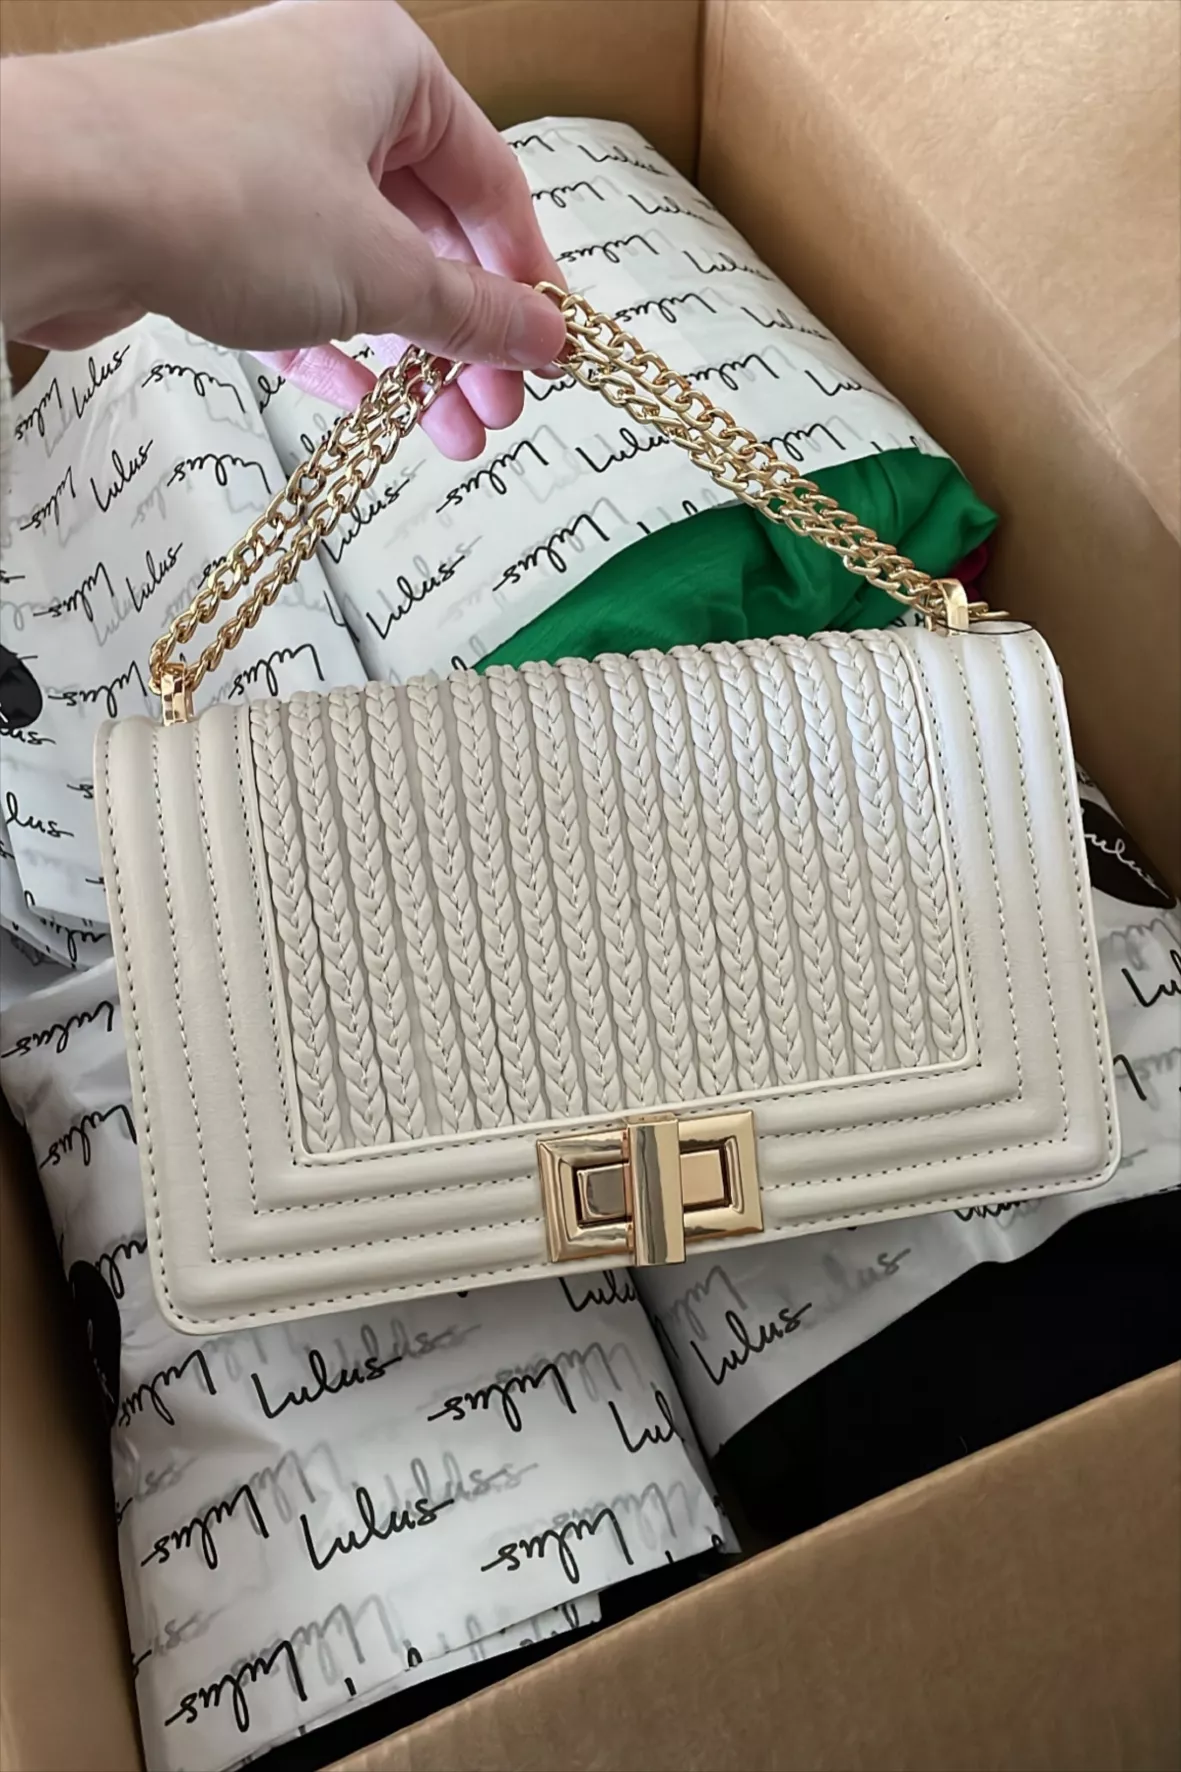 Let's Go Out Later White Braided Crossbody Bag